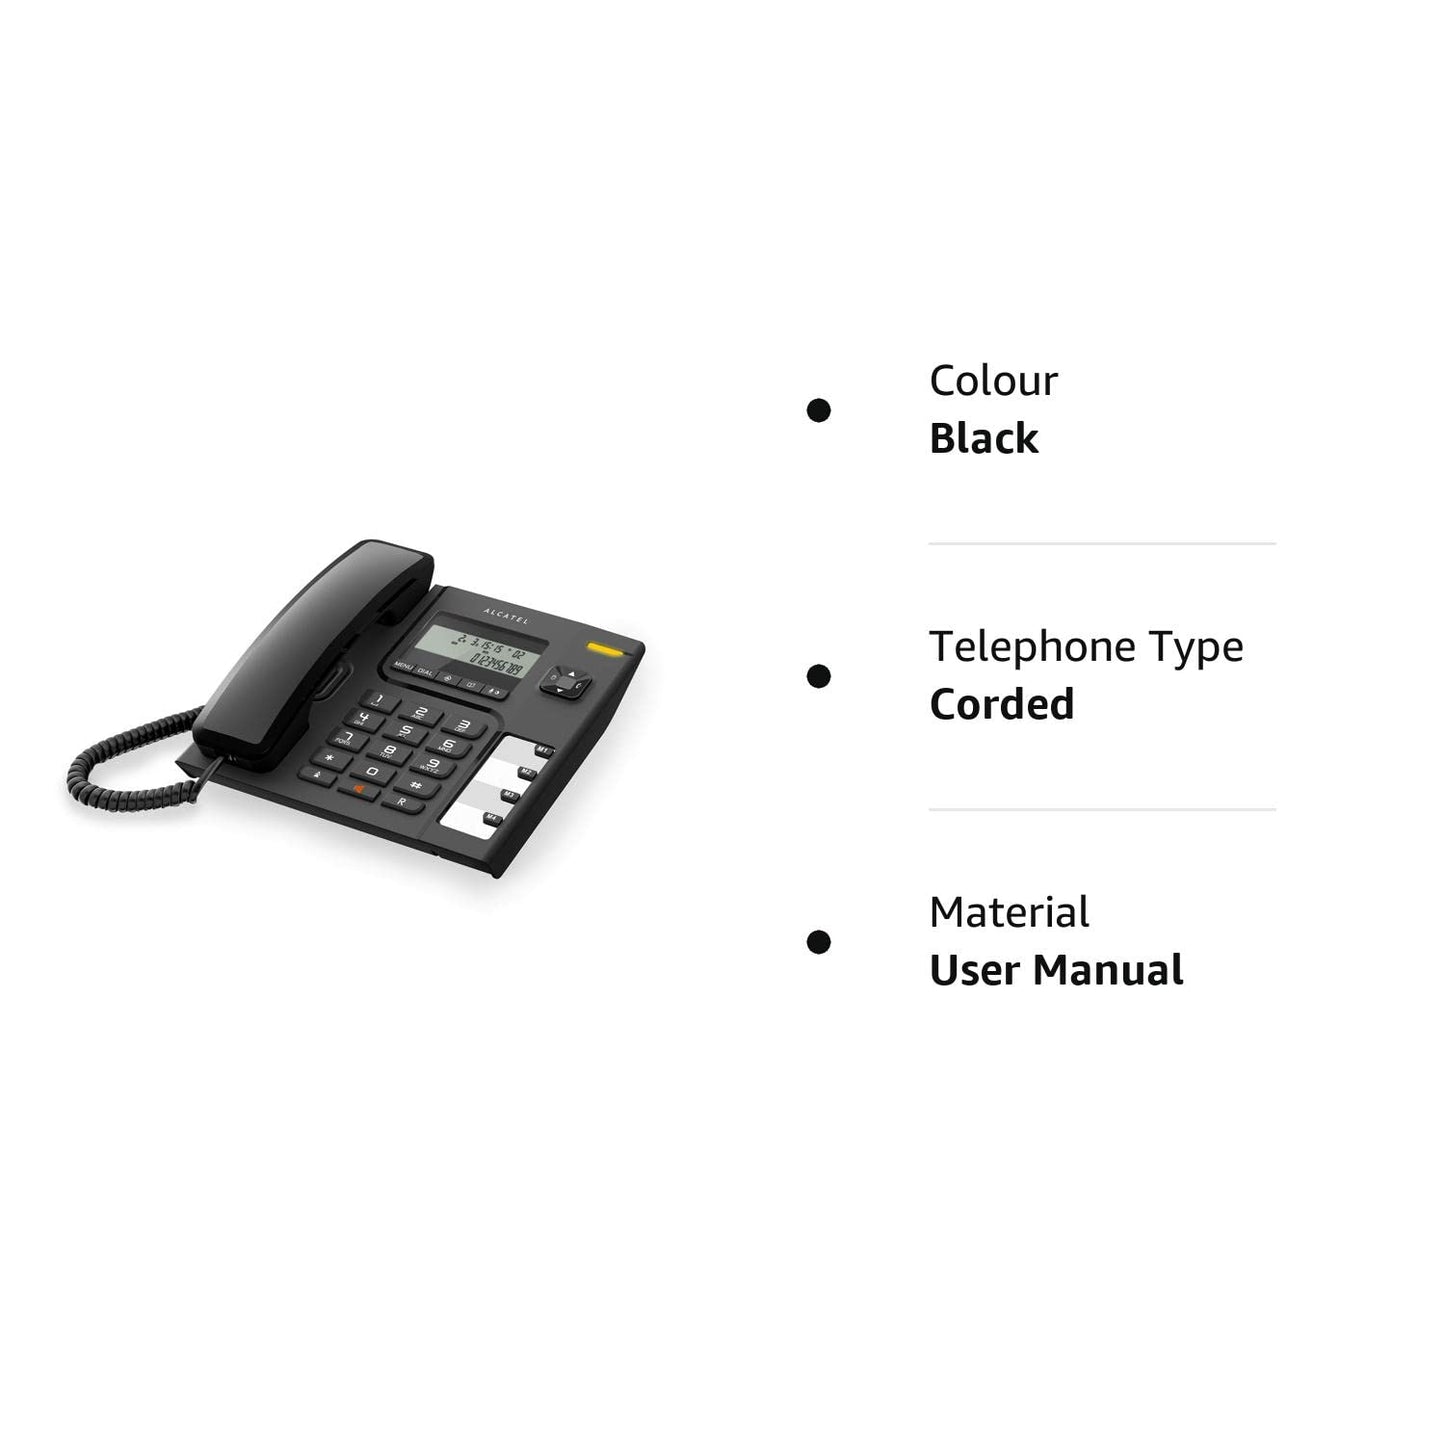 Alcatel T56 Corded Landline Phone With Caller Id And Handsfree (Black) Pack Of 2